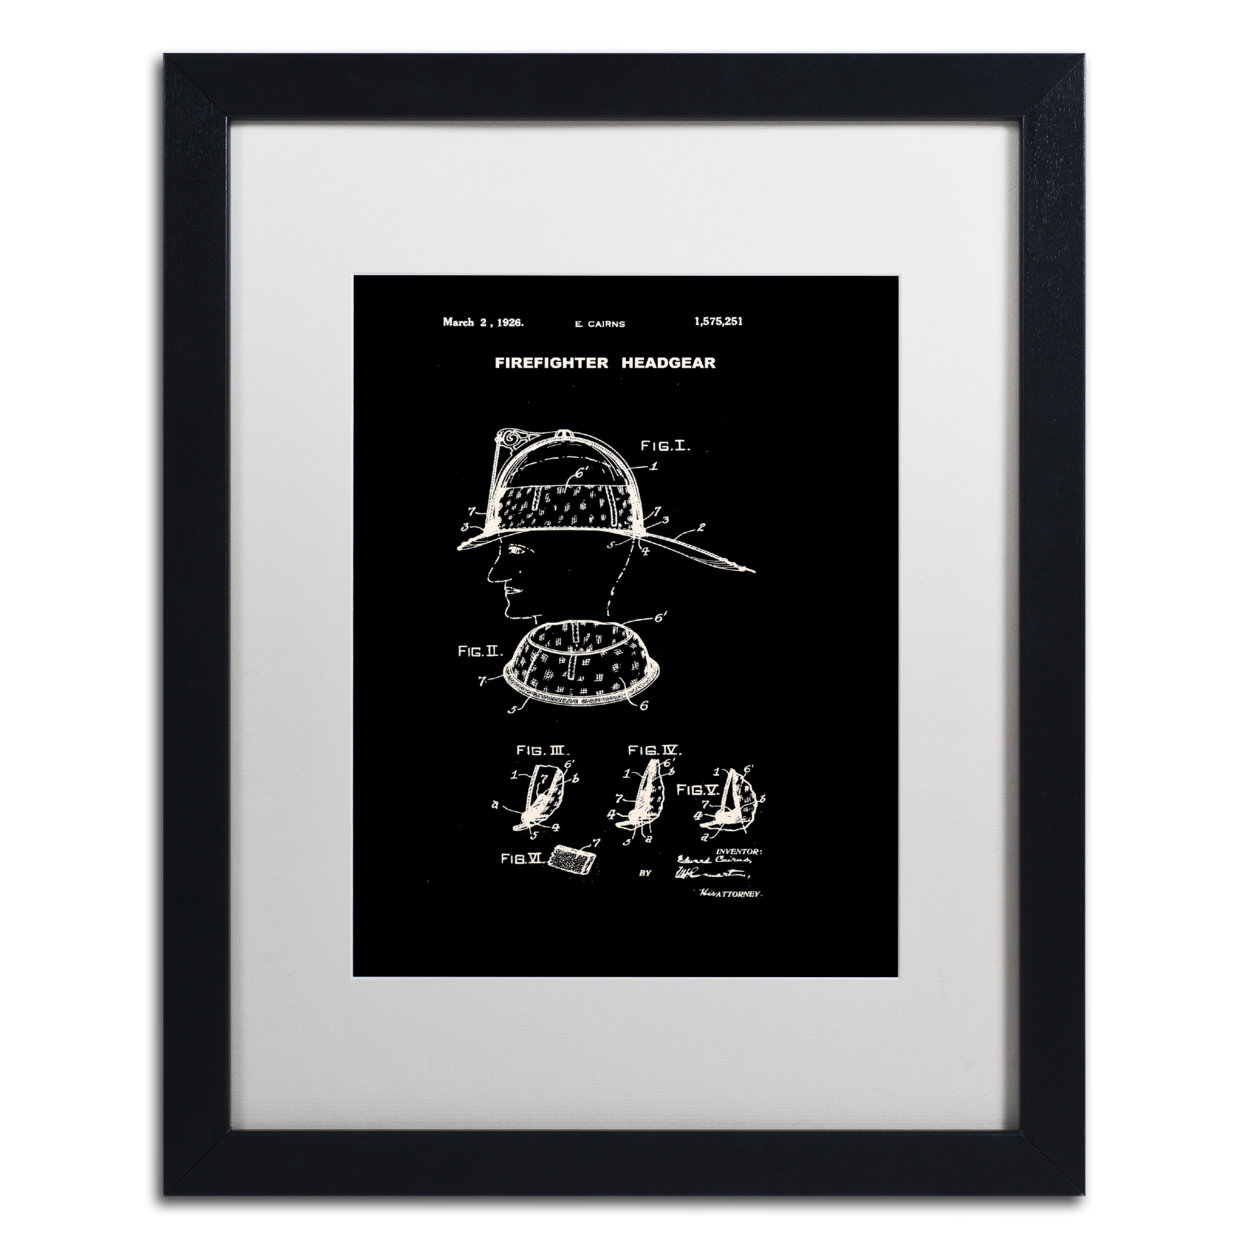 Claire Doherty 'Firefighter Headgear 1926 Black' Black Wooden Framed Art 18 X 22 Inches